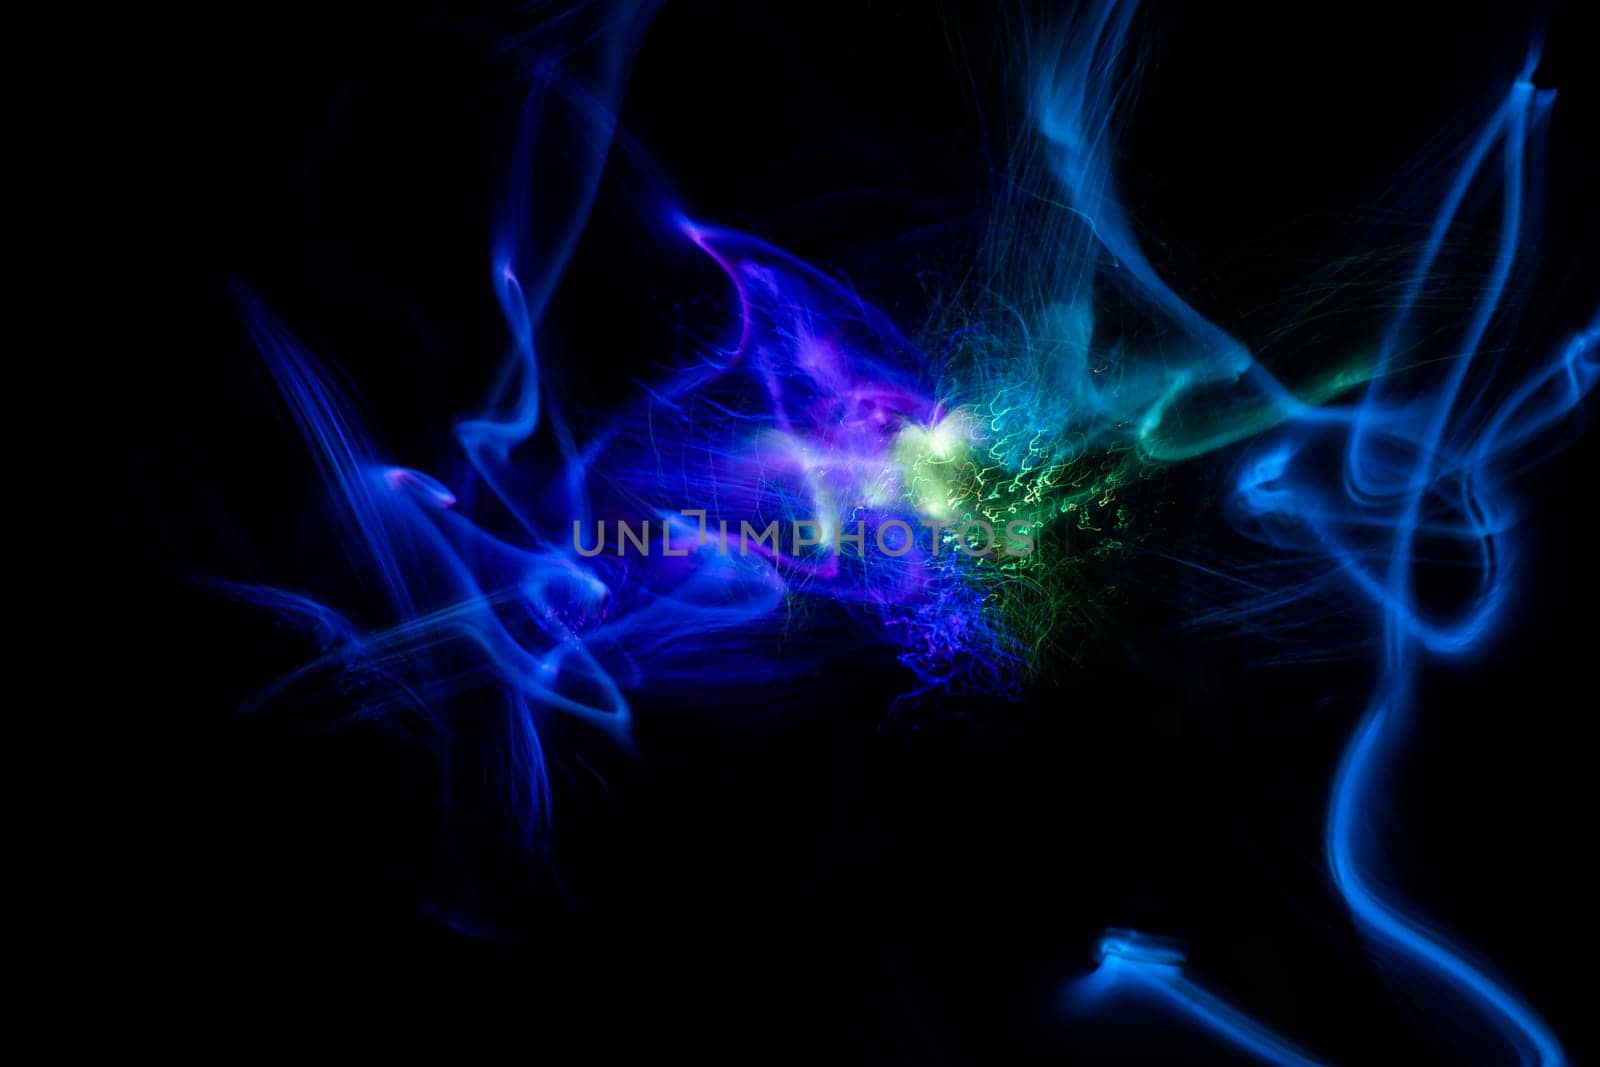 Blue and green light explosion of energy with elegant glowing lines. Abstract technology background. by PaulCarr